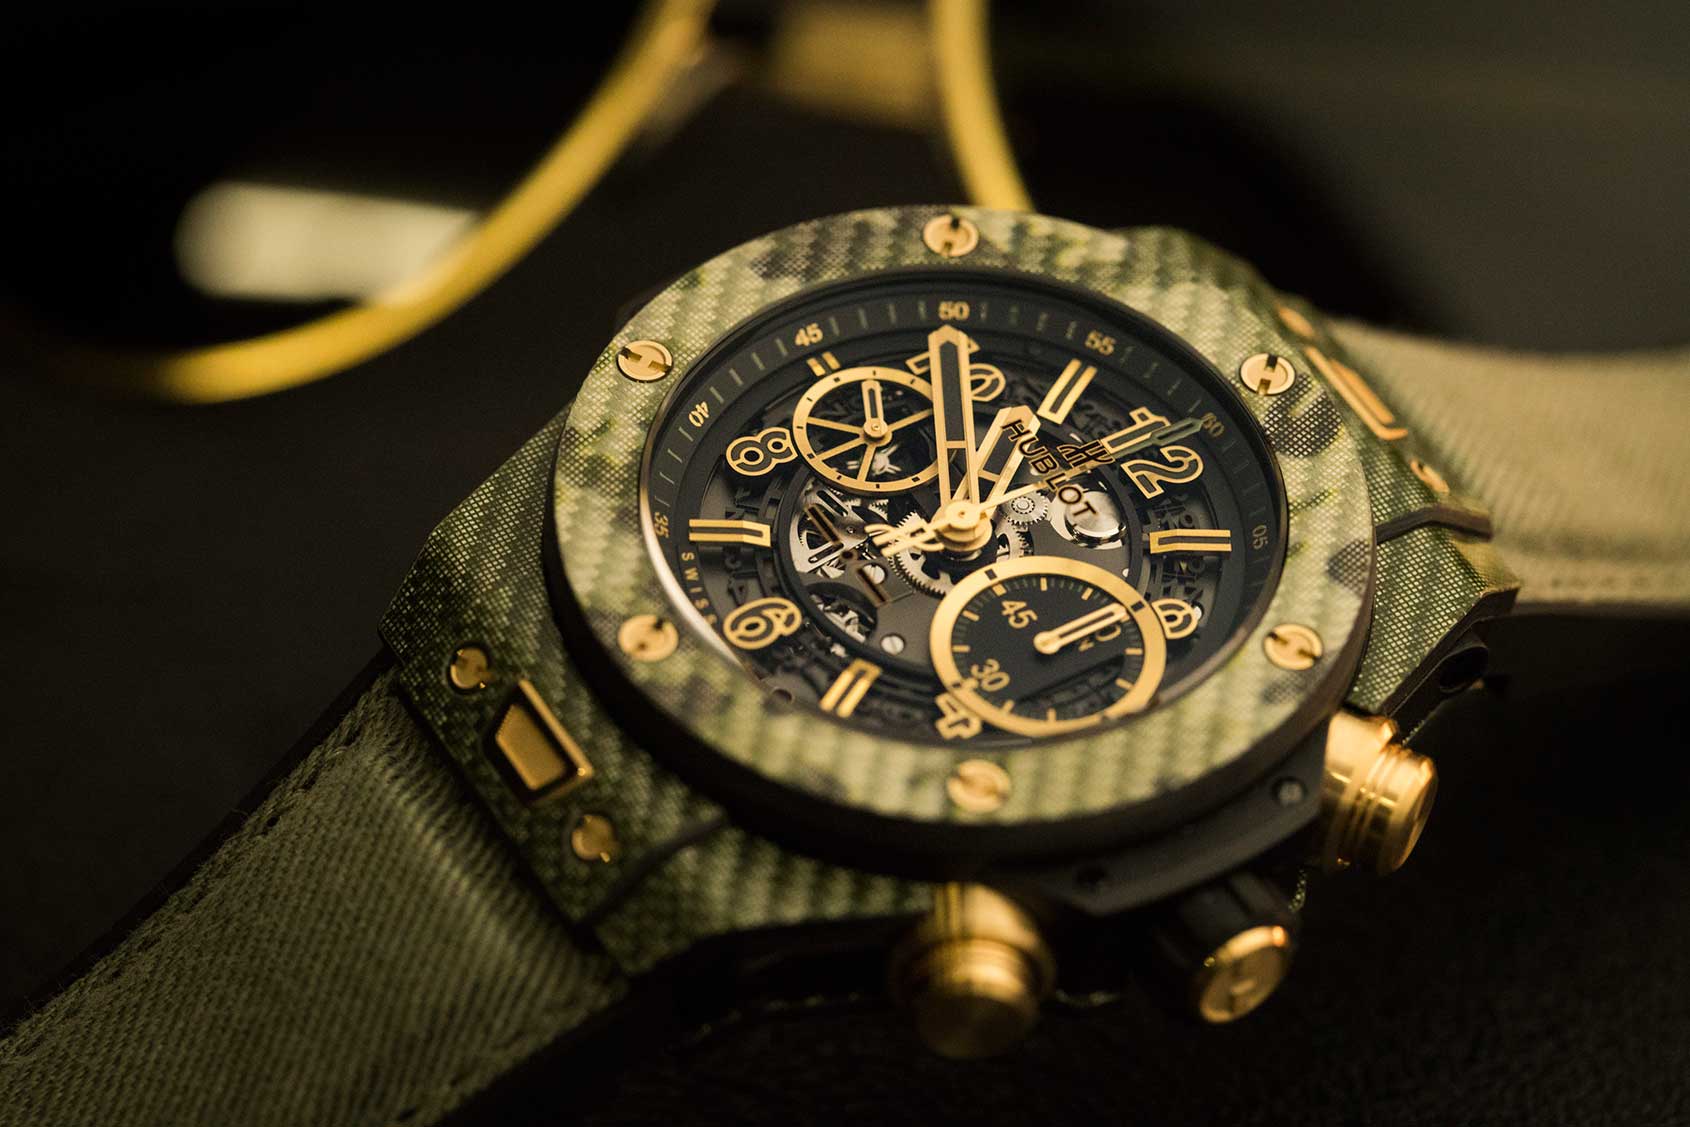 HANDS-ON: The Hublot Big Bang Unico Italia Independent ‘Camo Green’ – camouflage that stands out